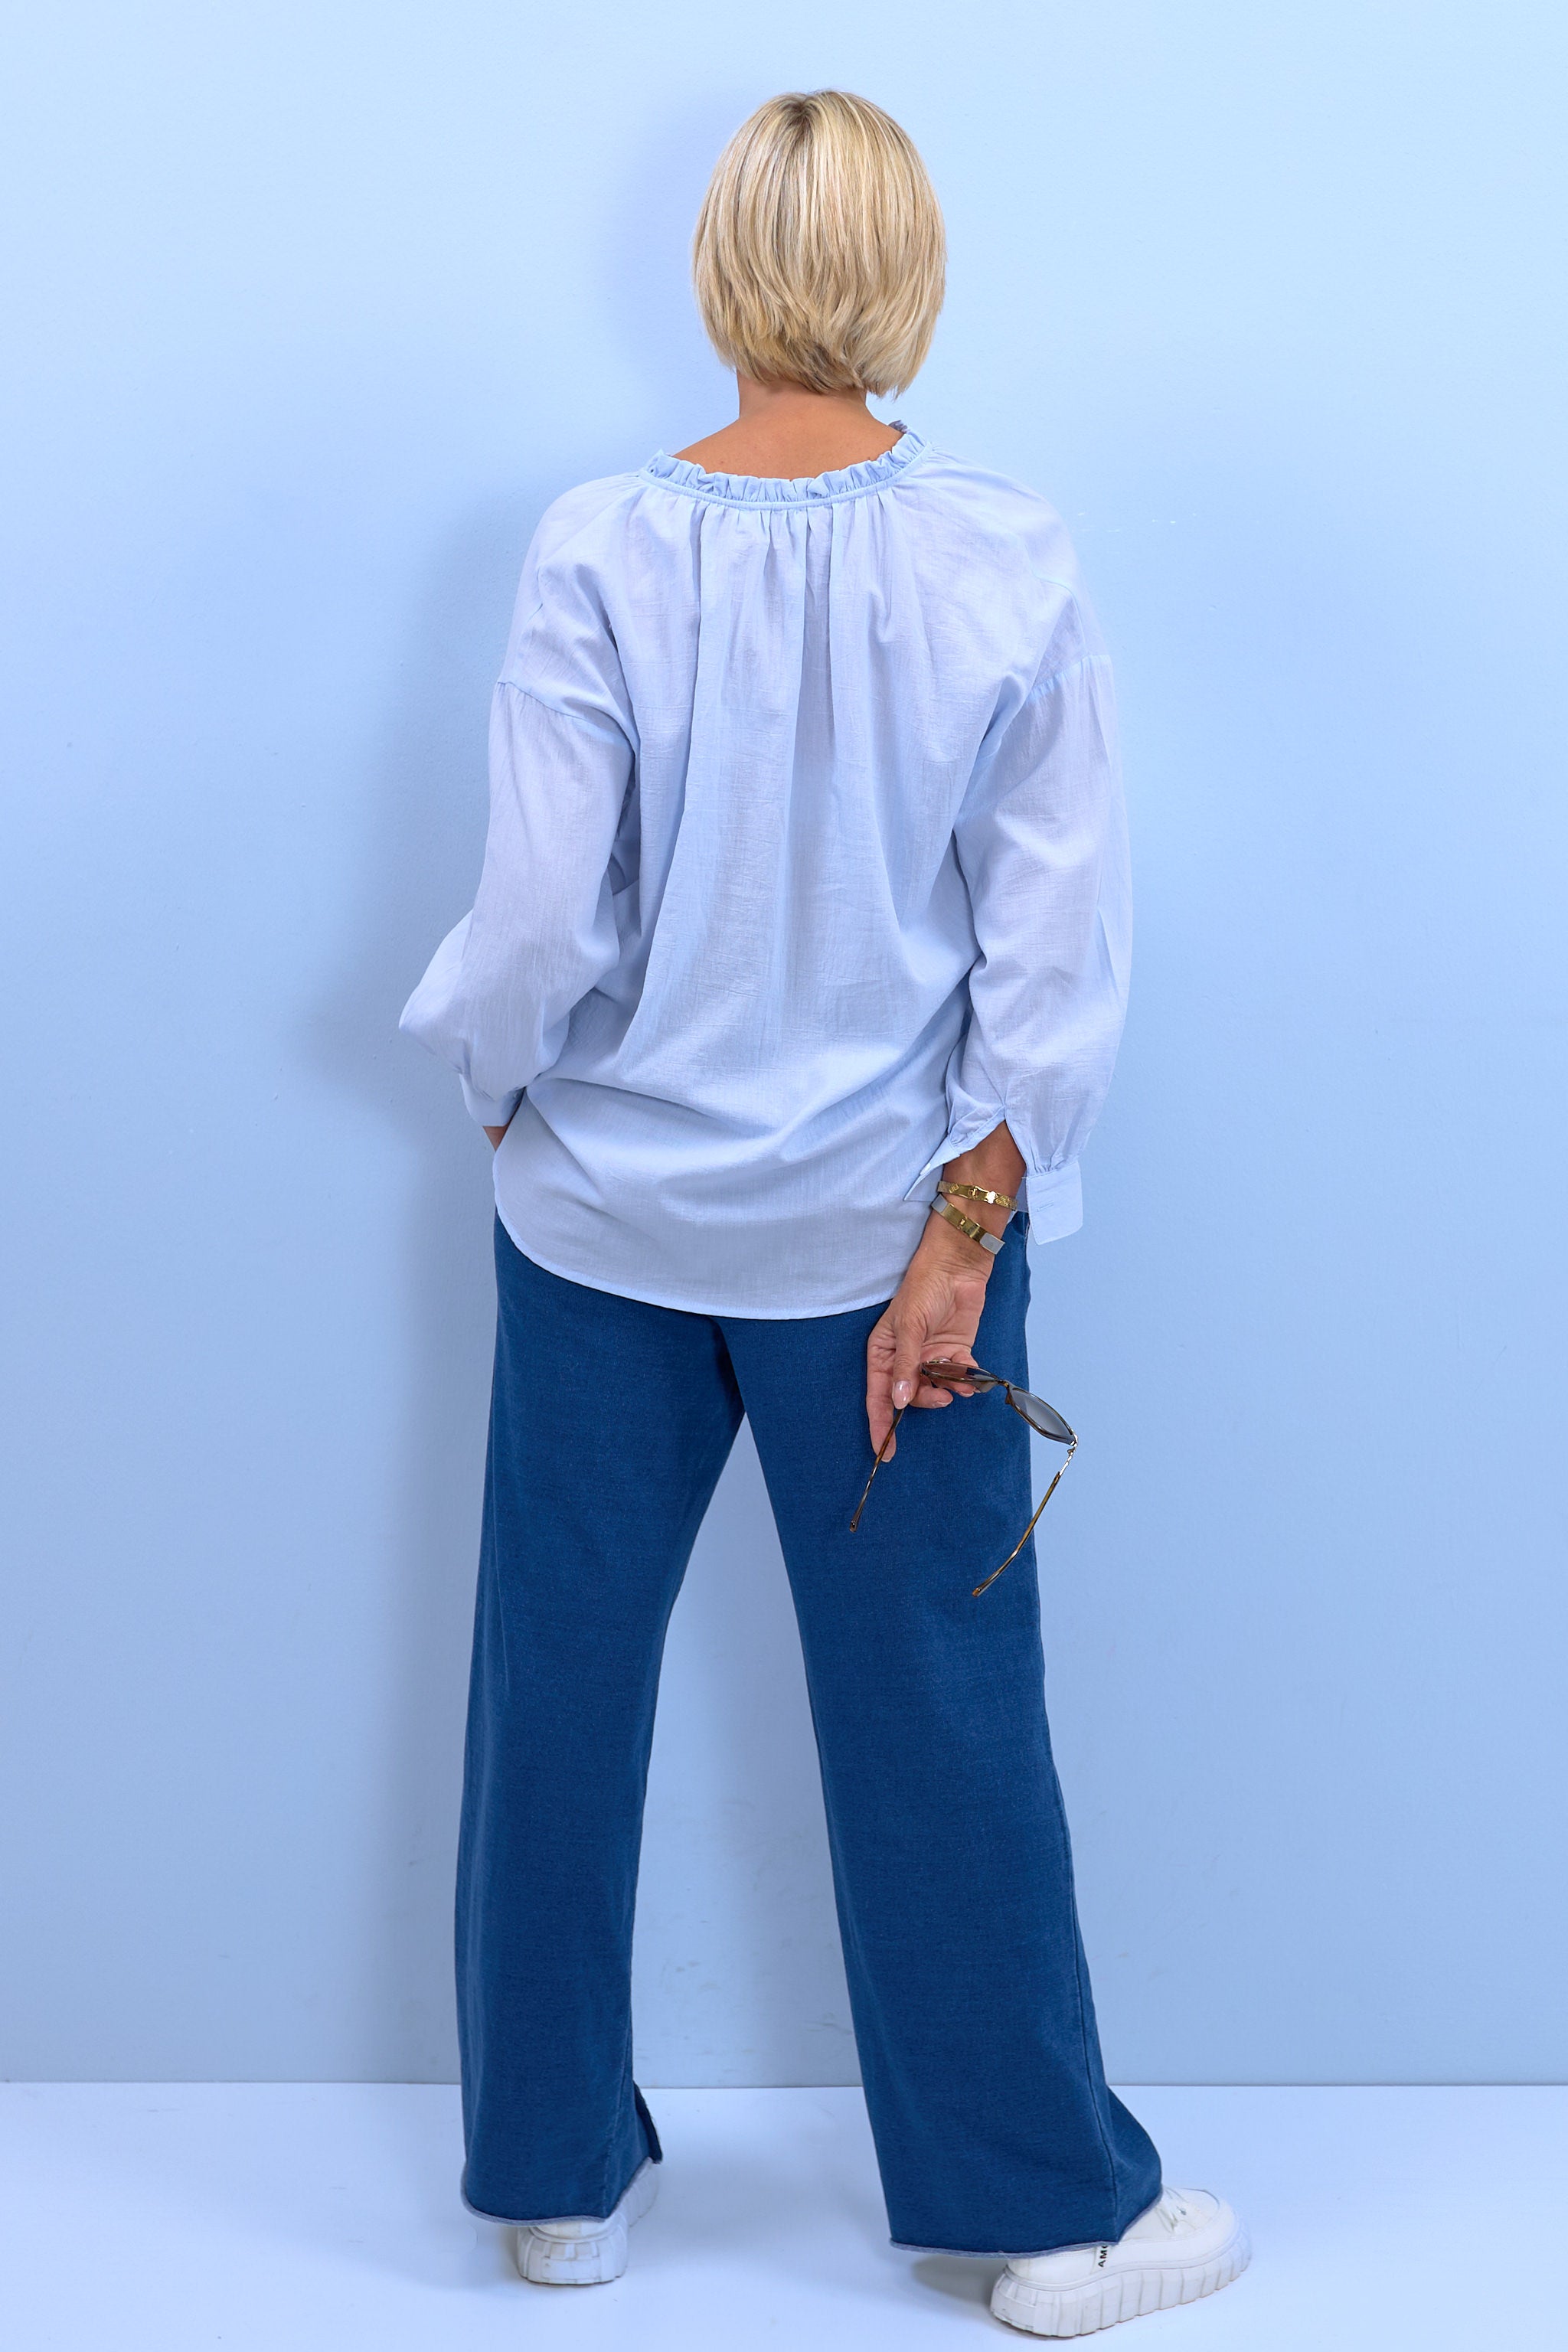 Blouse with a small ruffle at the neckline, light blue